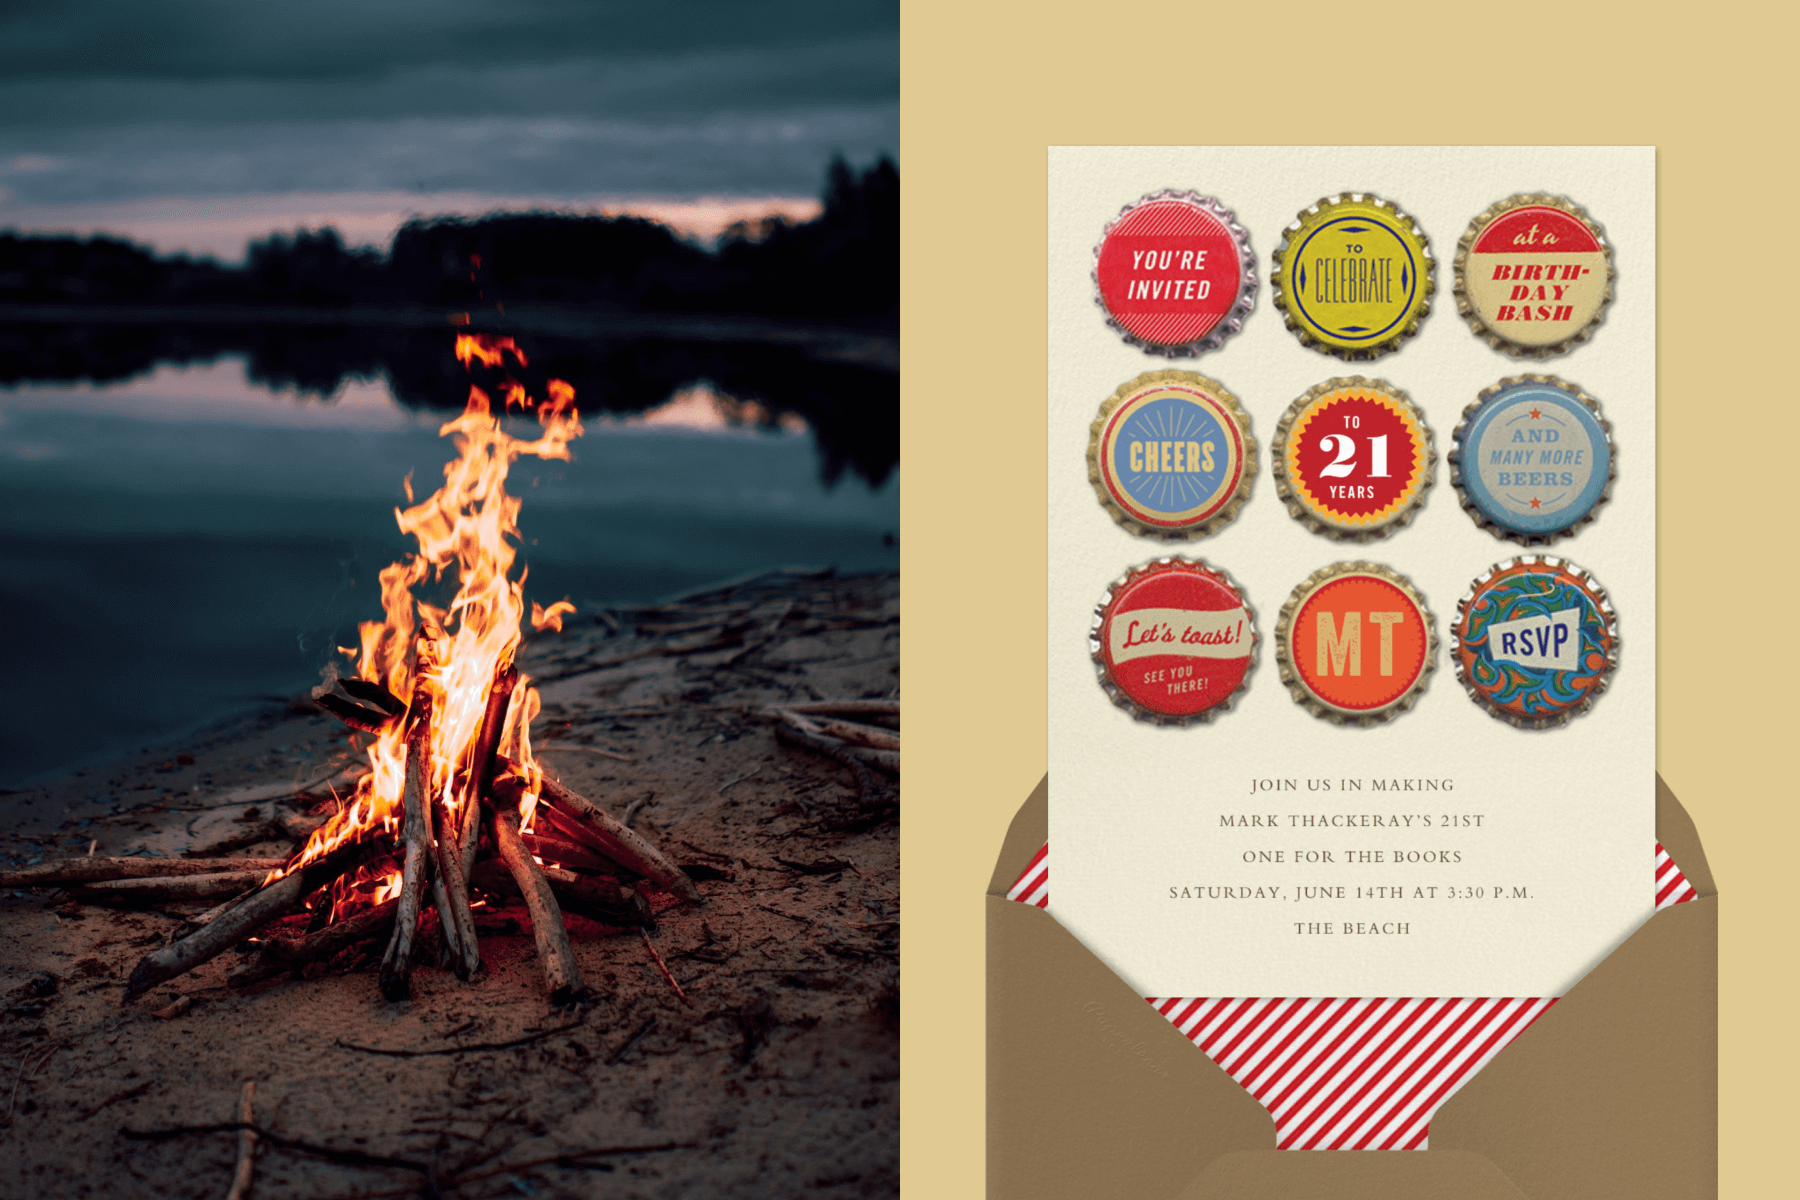 Left: A bonfire on a beach; Right: A 21st birthday invitation with illustrated bottle caps.